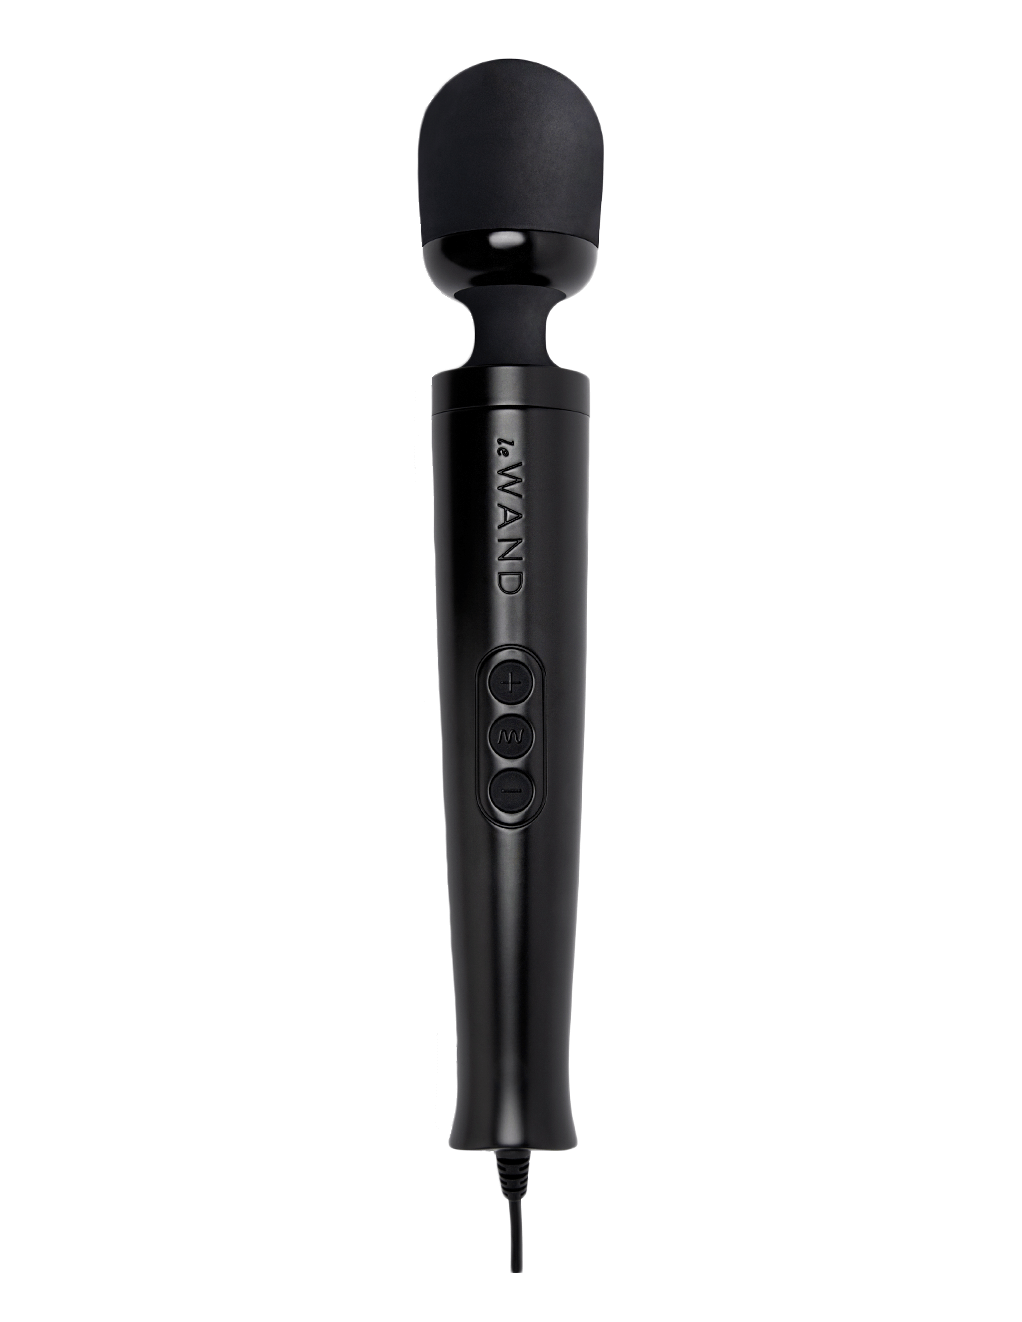 Le Wand Diecast Plug-In Vibrating Wand - Black - Upright